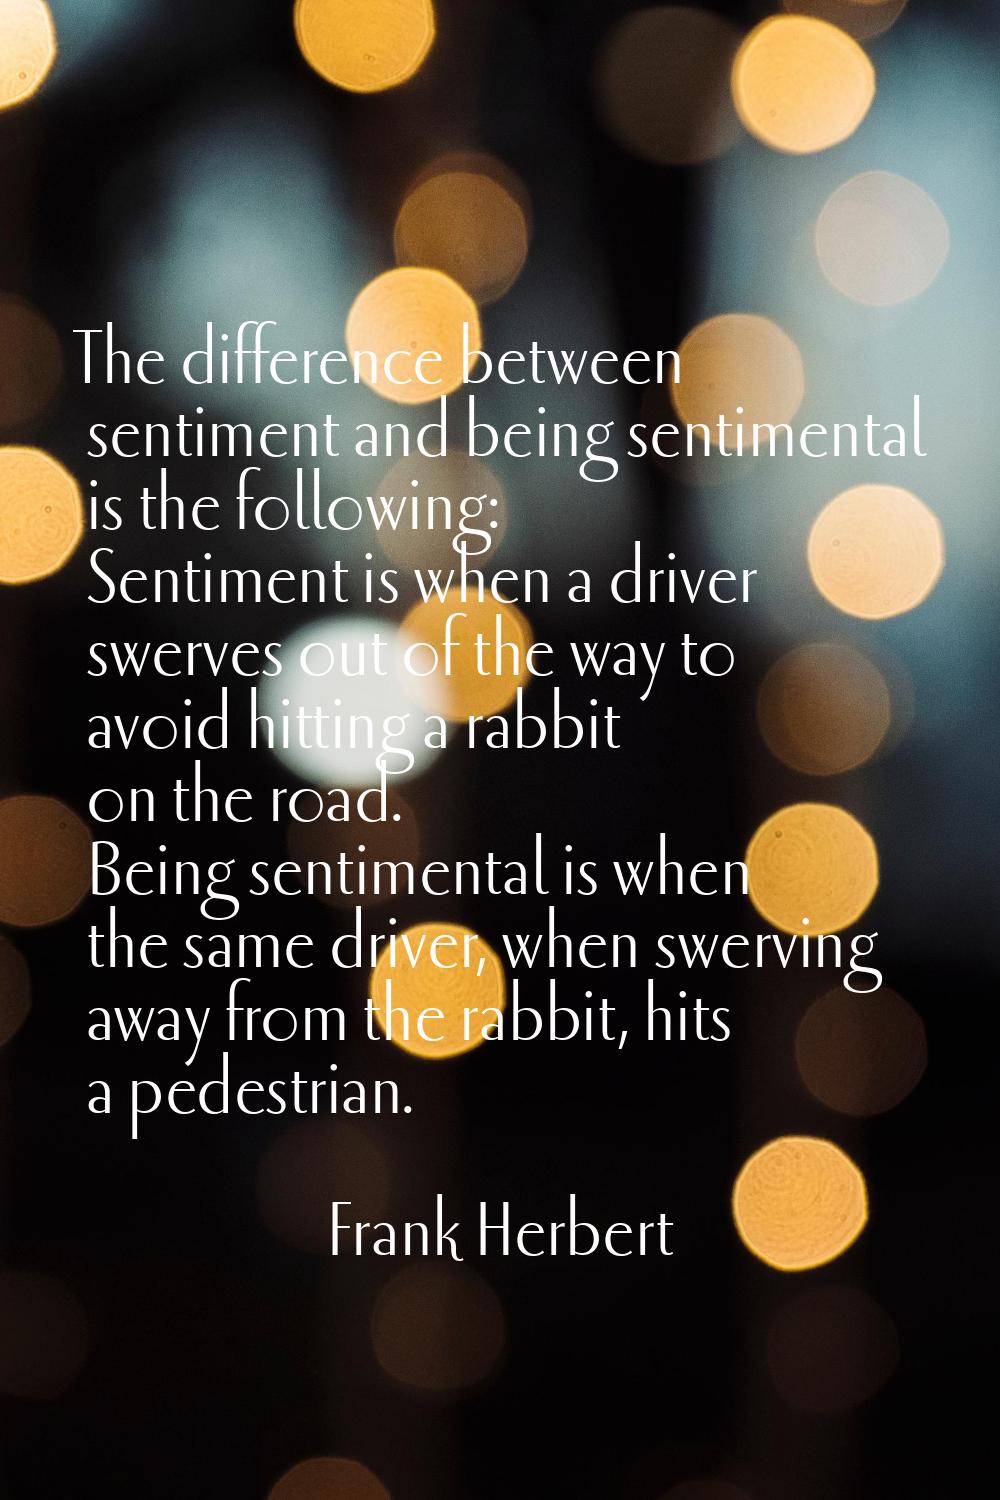 The difference between sentiment and being sentimental is the following: Sentiment is when a driver